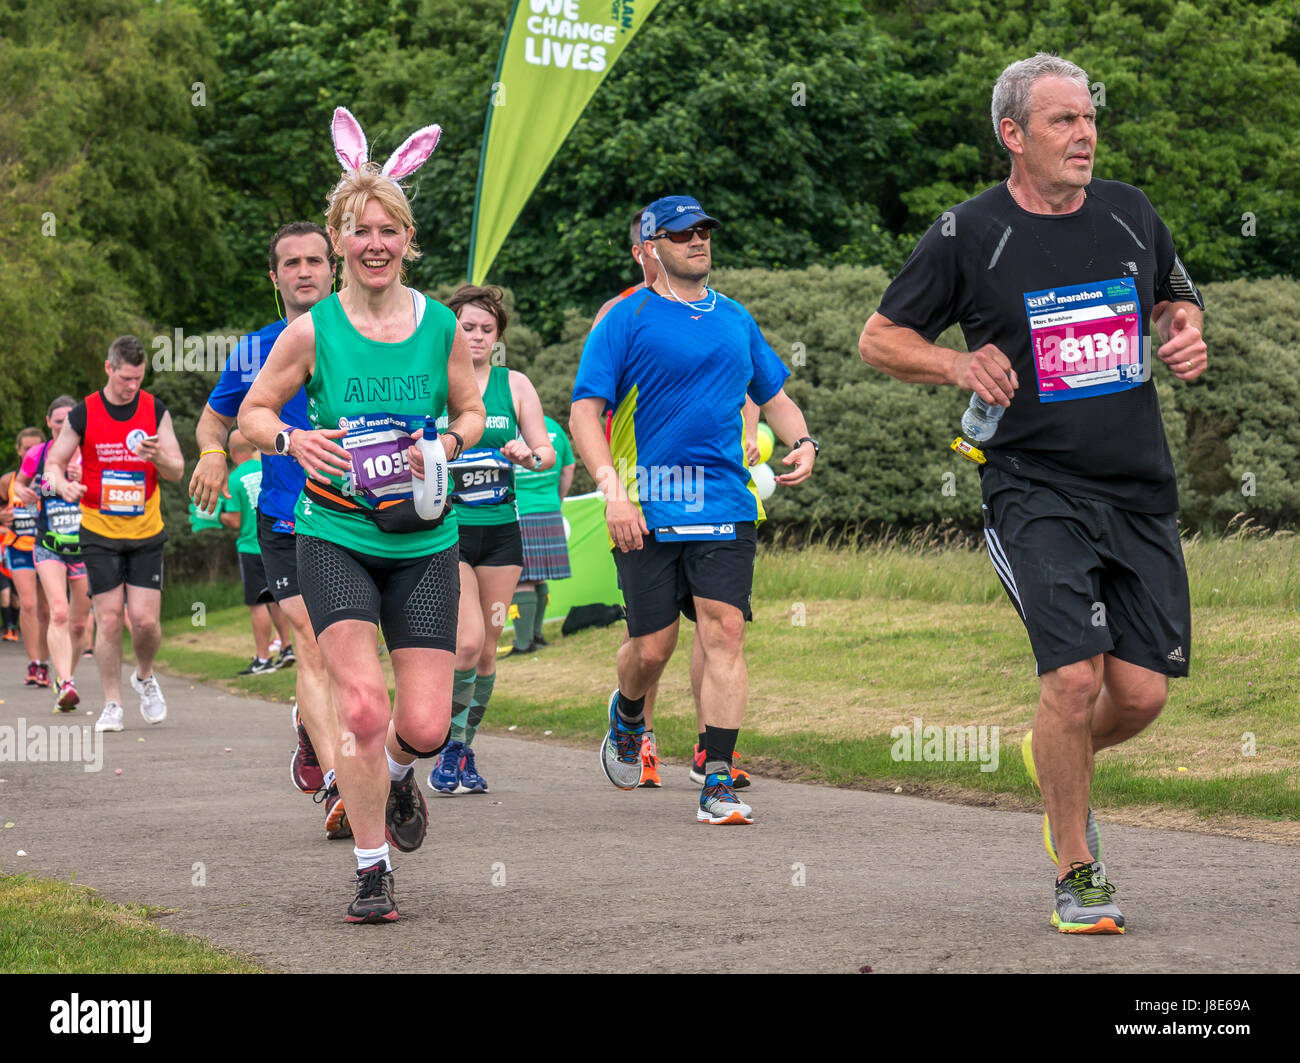 Gosford Estate, East Lothian, Scotland, UK. 28th May, 2017. A  smiling female runner with bunny ears in the Edinburgh Marathon Festival 2017 in Gosford Estate at Mile 18 Stock Photo